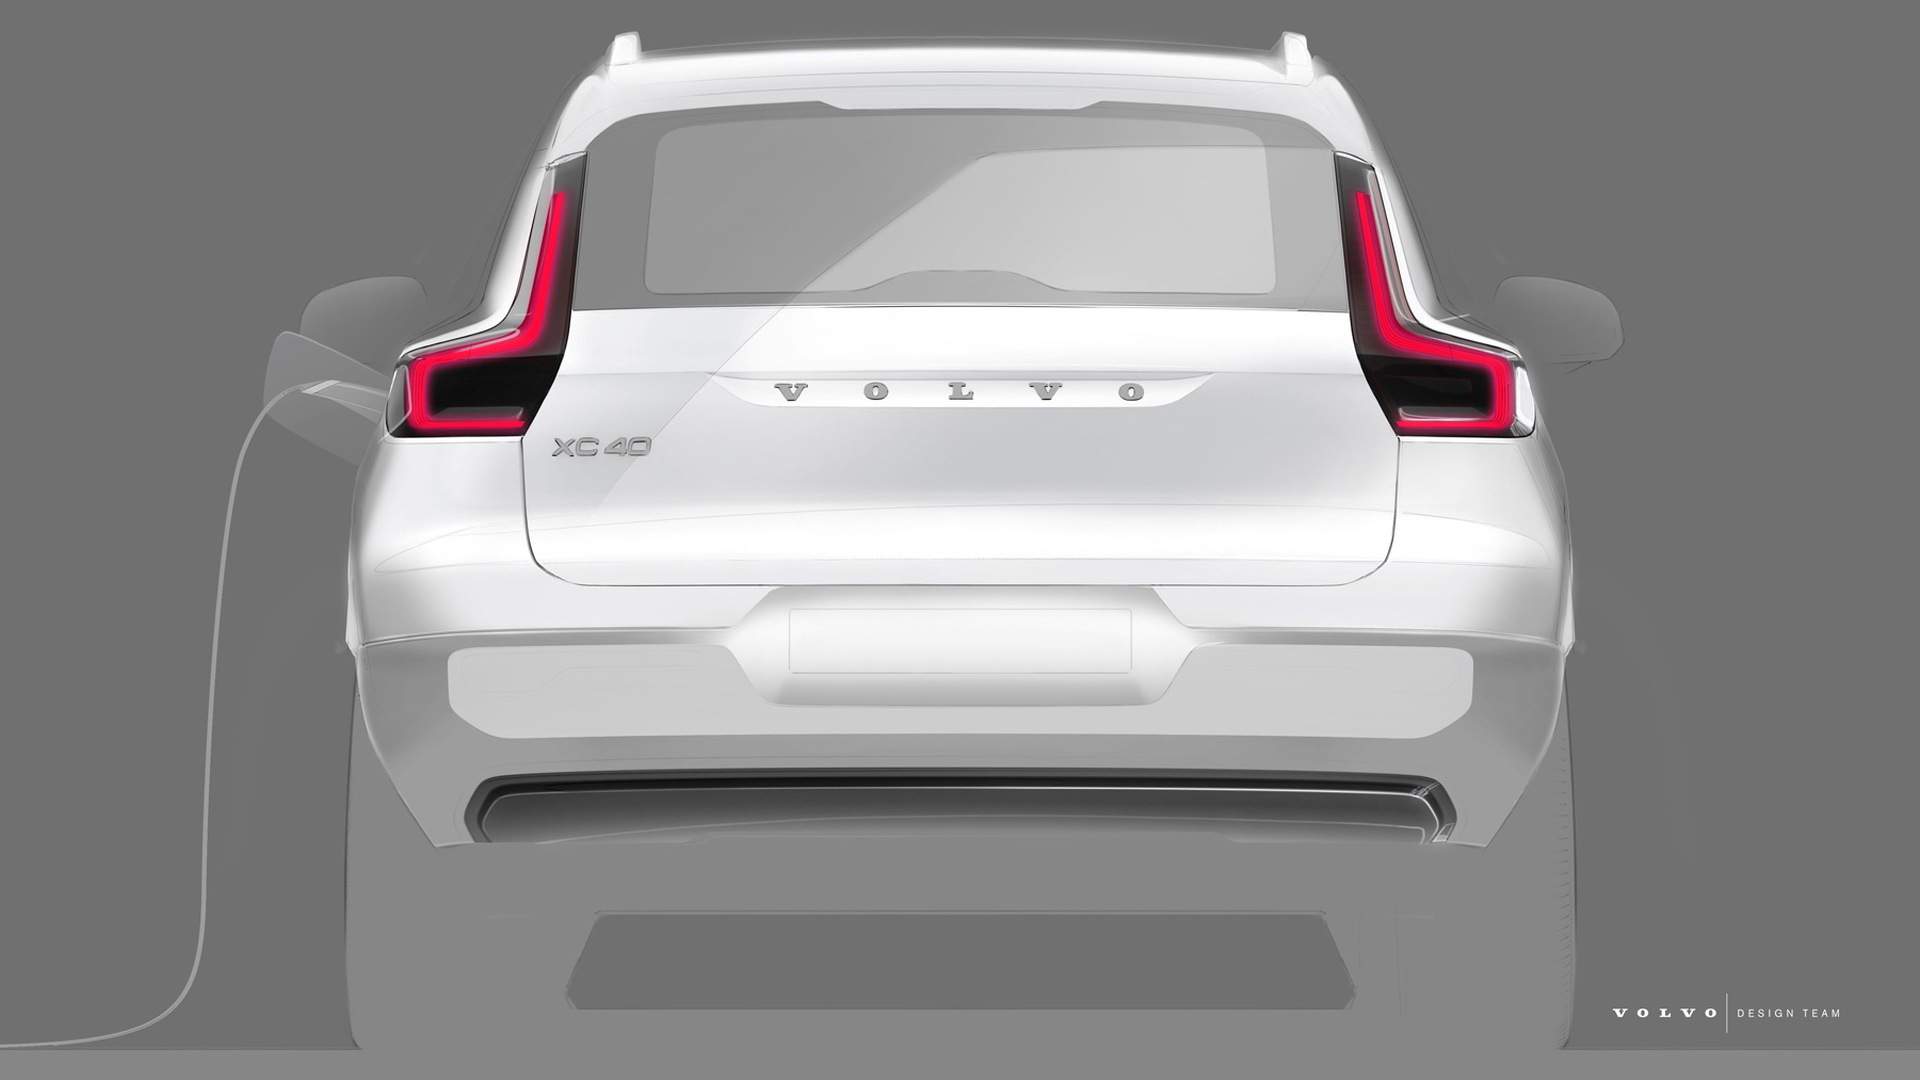 Teaser for electric Volvo XC40 debuting on October 16, 2019